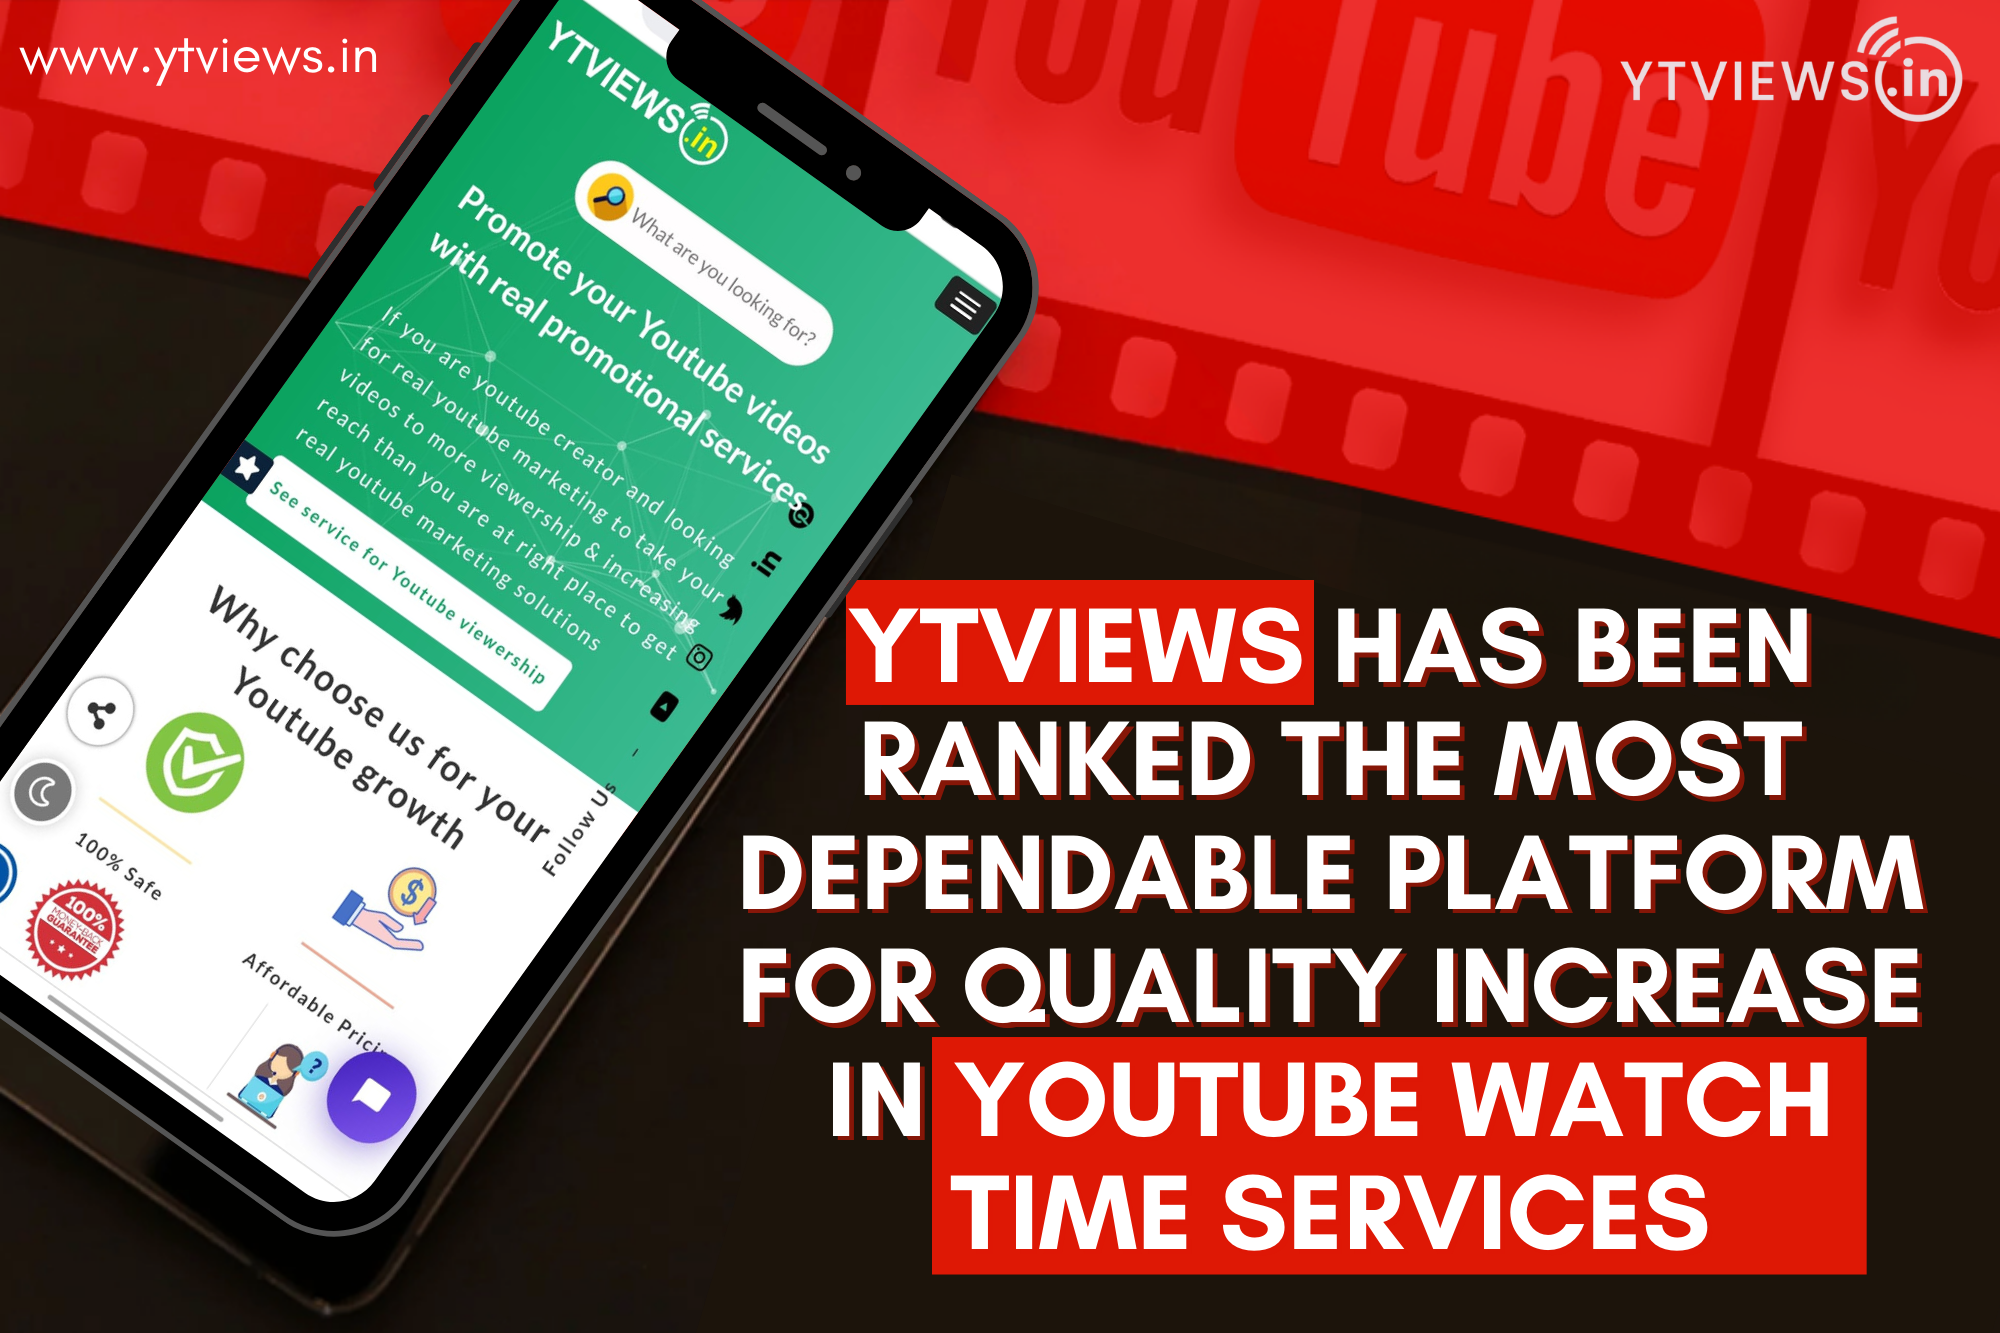 Ytviews has been ranked the most dependable platform for quality increase in YouTube watchtime services